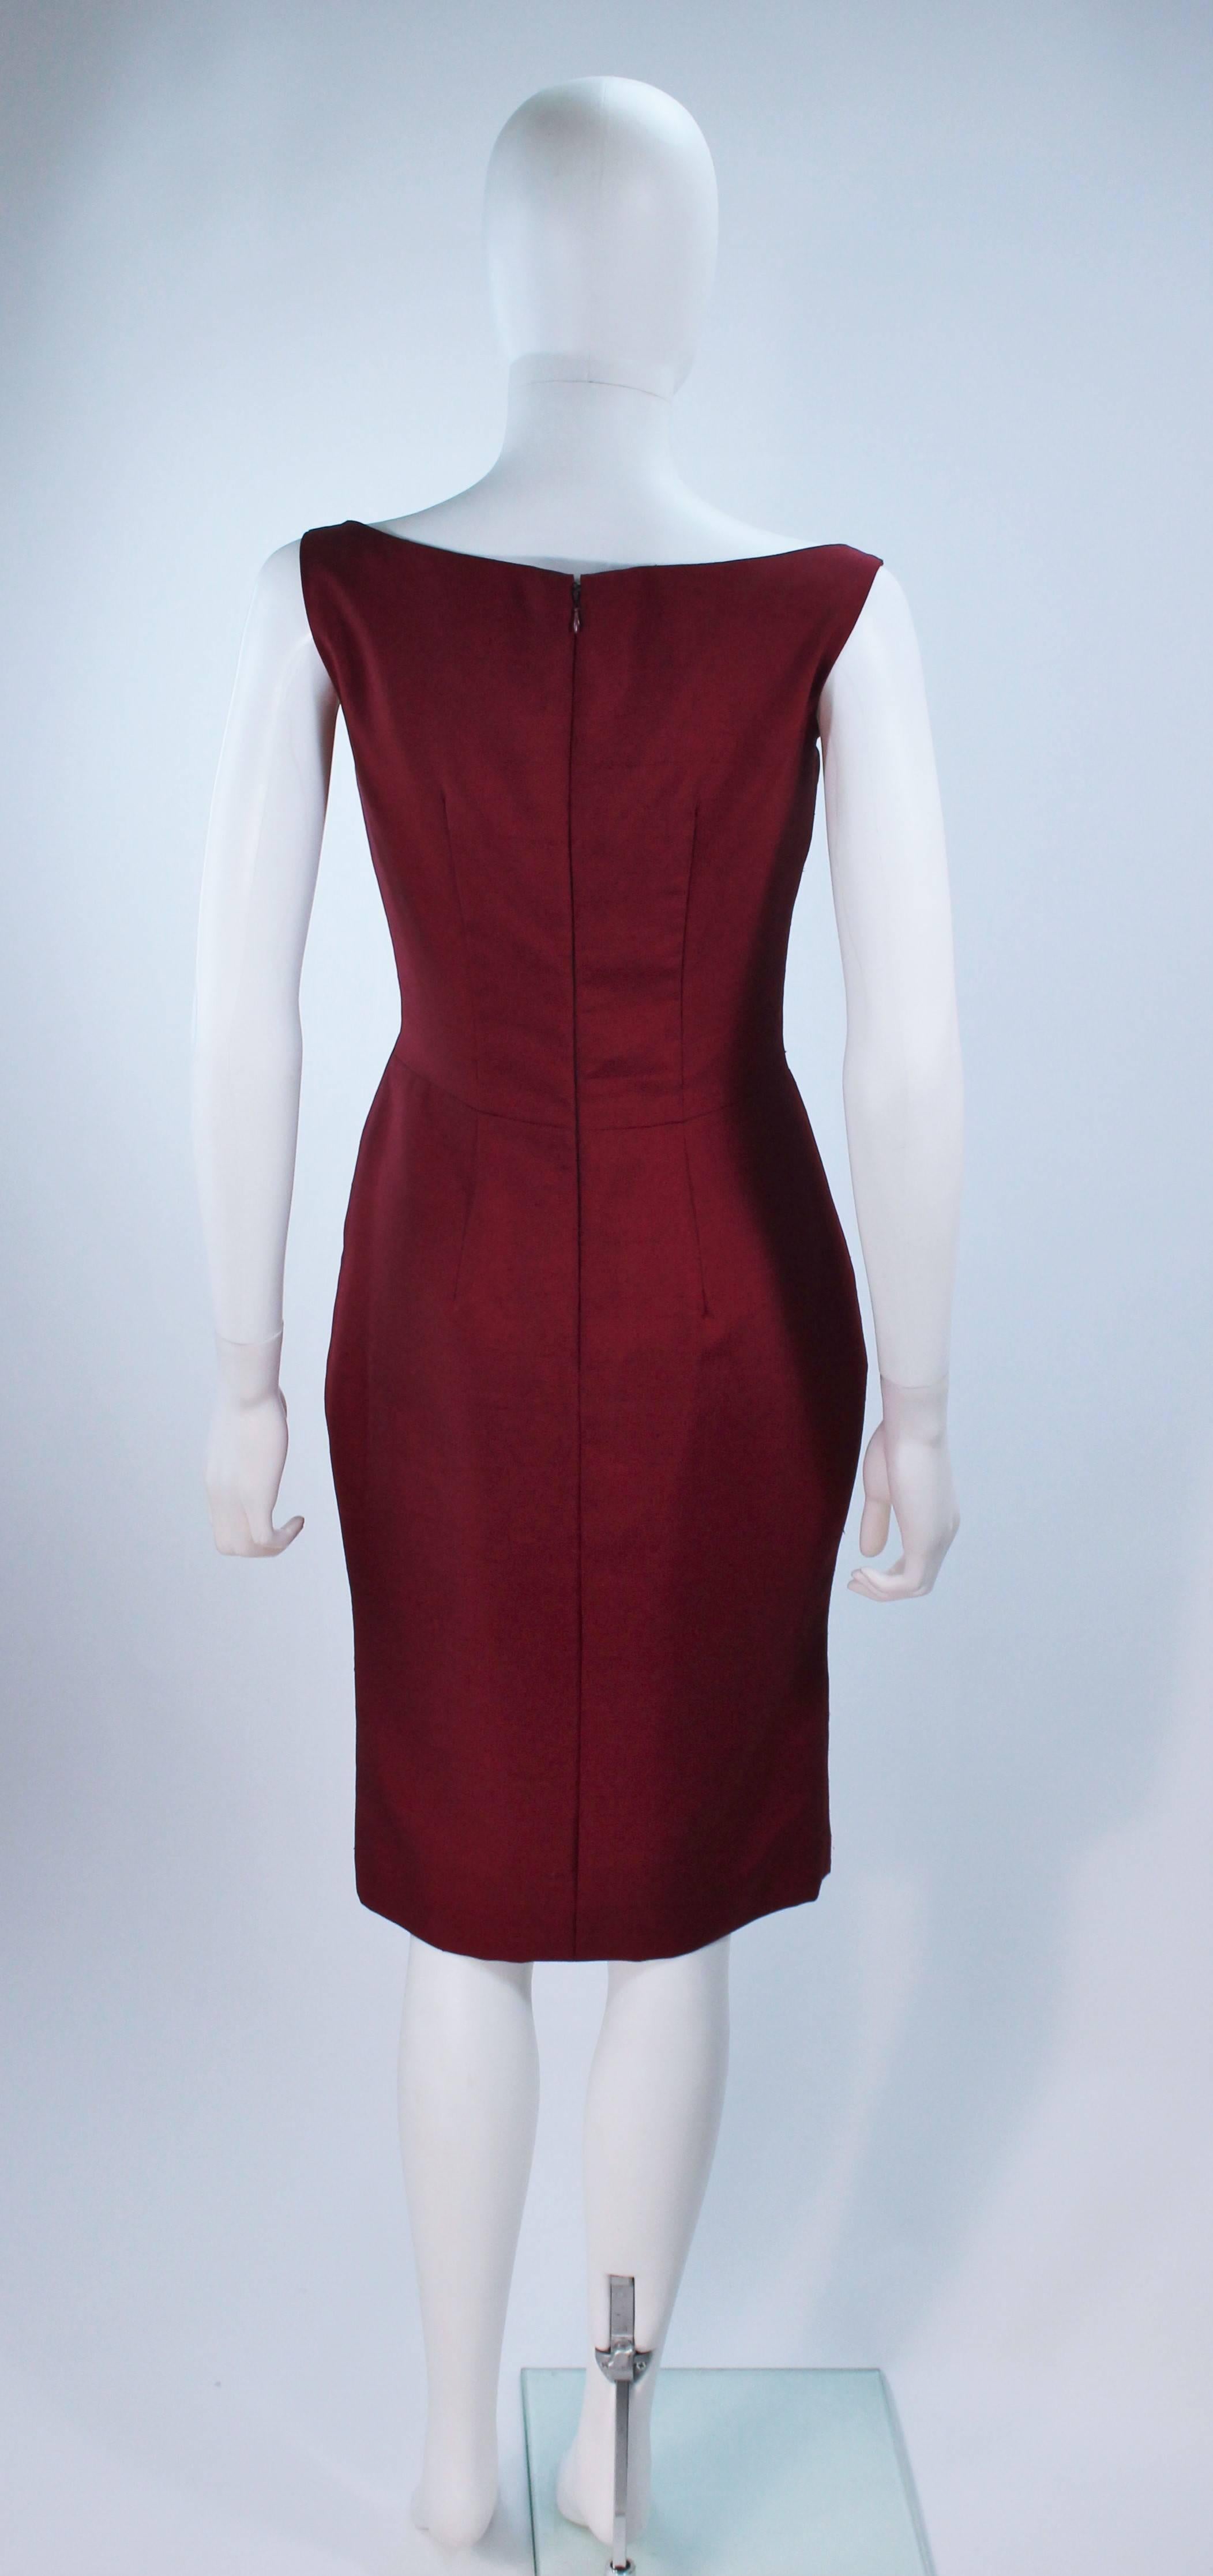 ELIZABETH MASON COUTURE Burgundy Silk Cocktail Dress with Bow Made to Order For Sale 1